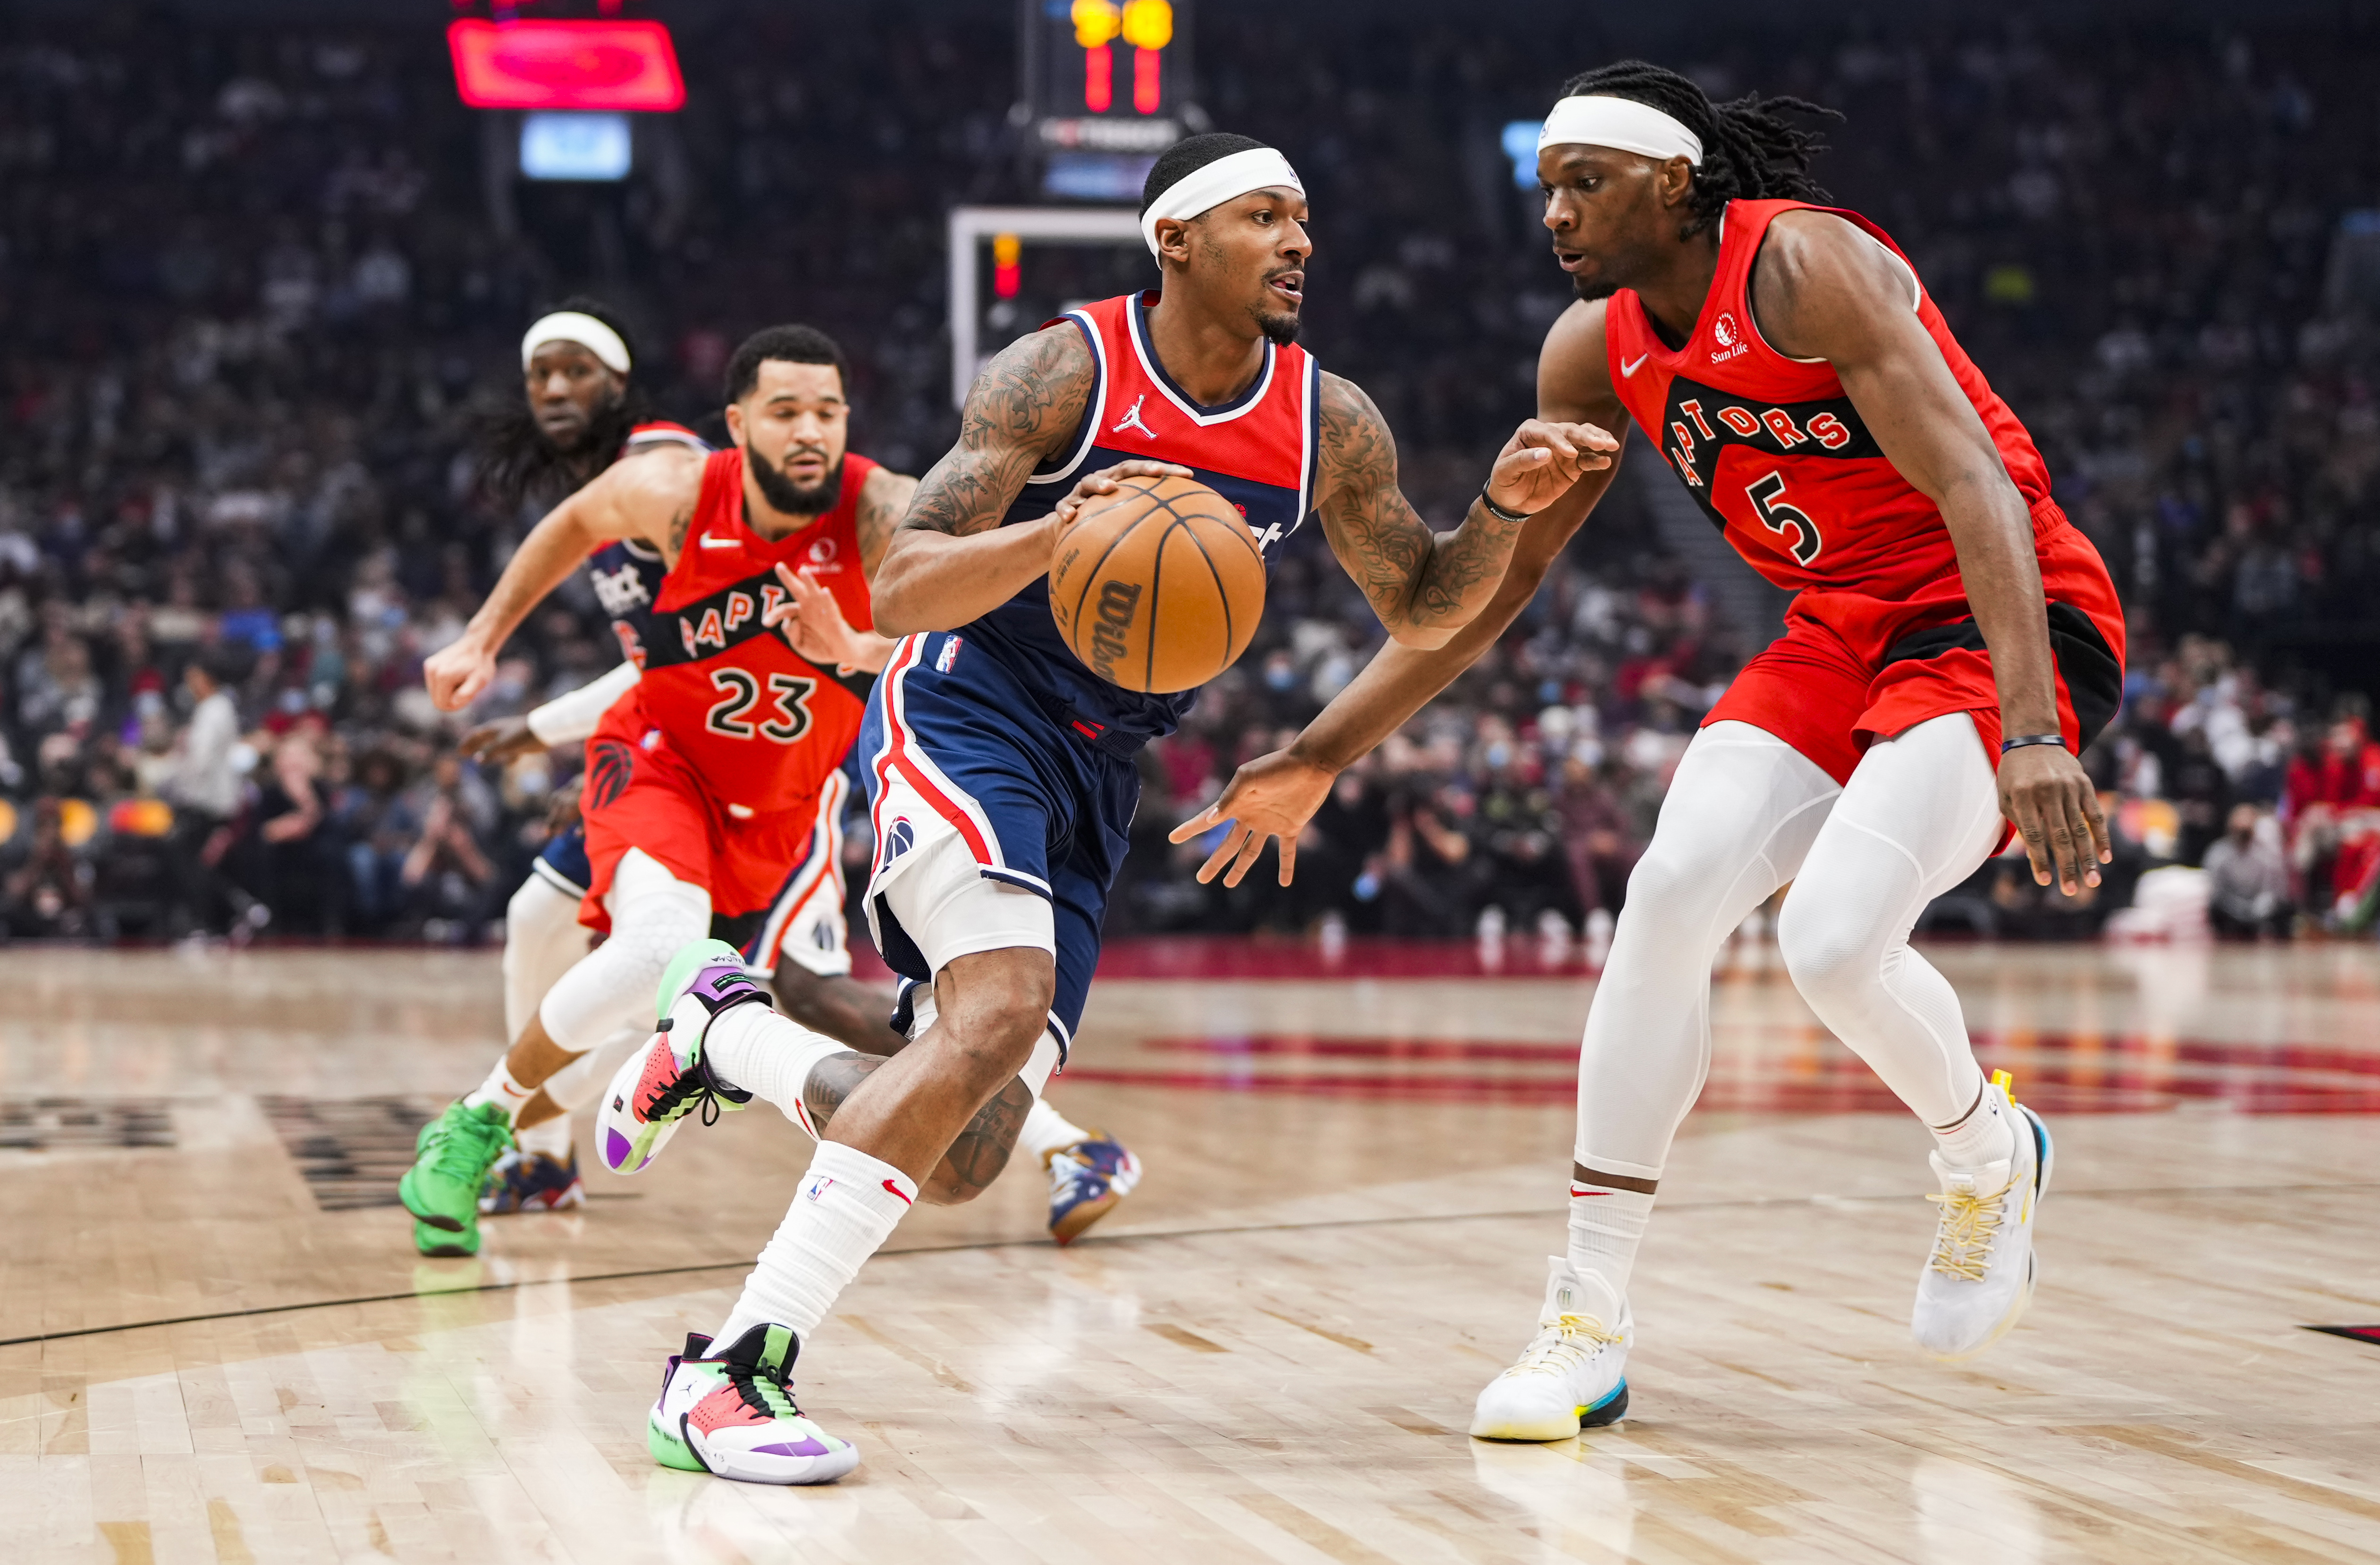 Washington Wizards guard Bradley Beal drives to the basket during a game against the Toronto Raptors